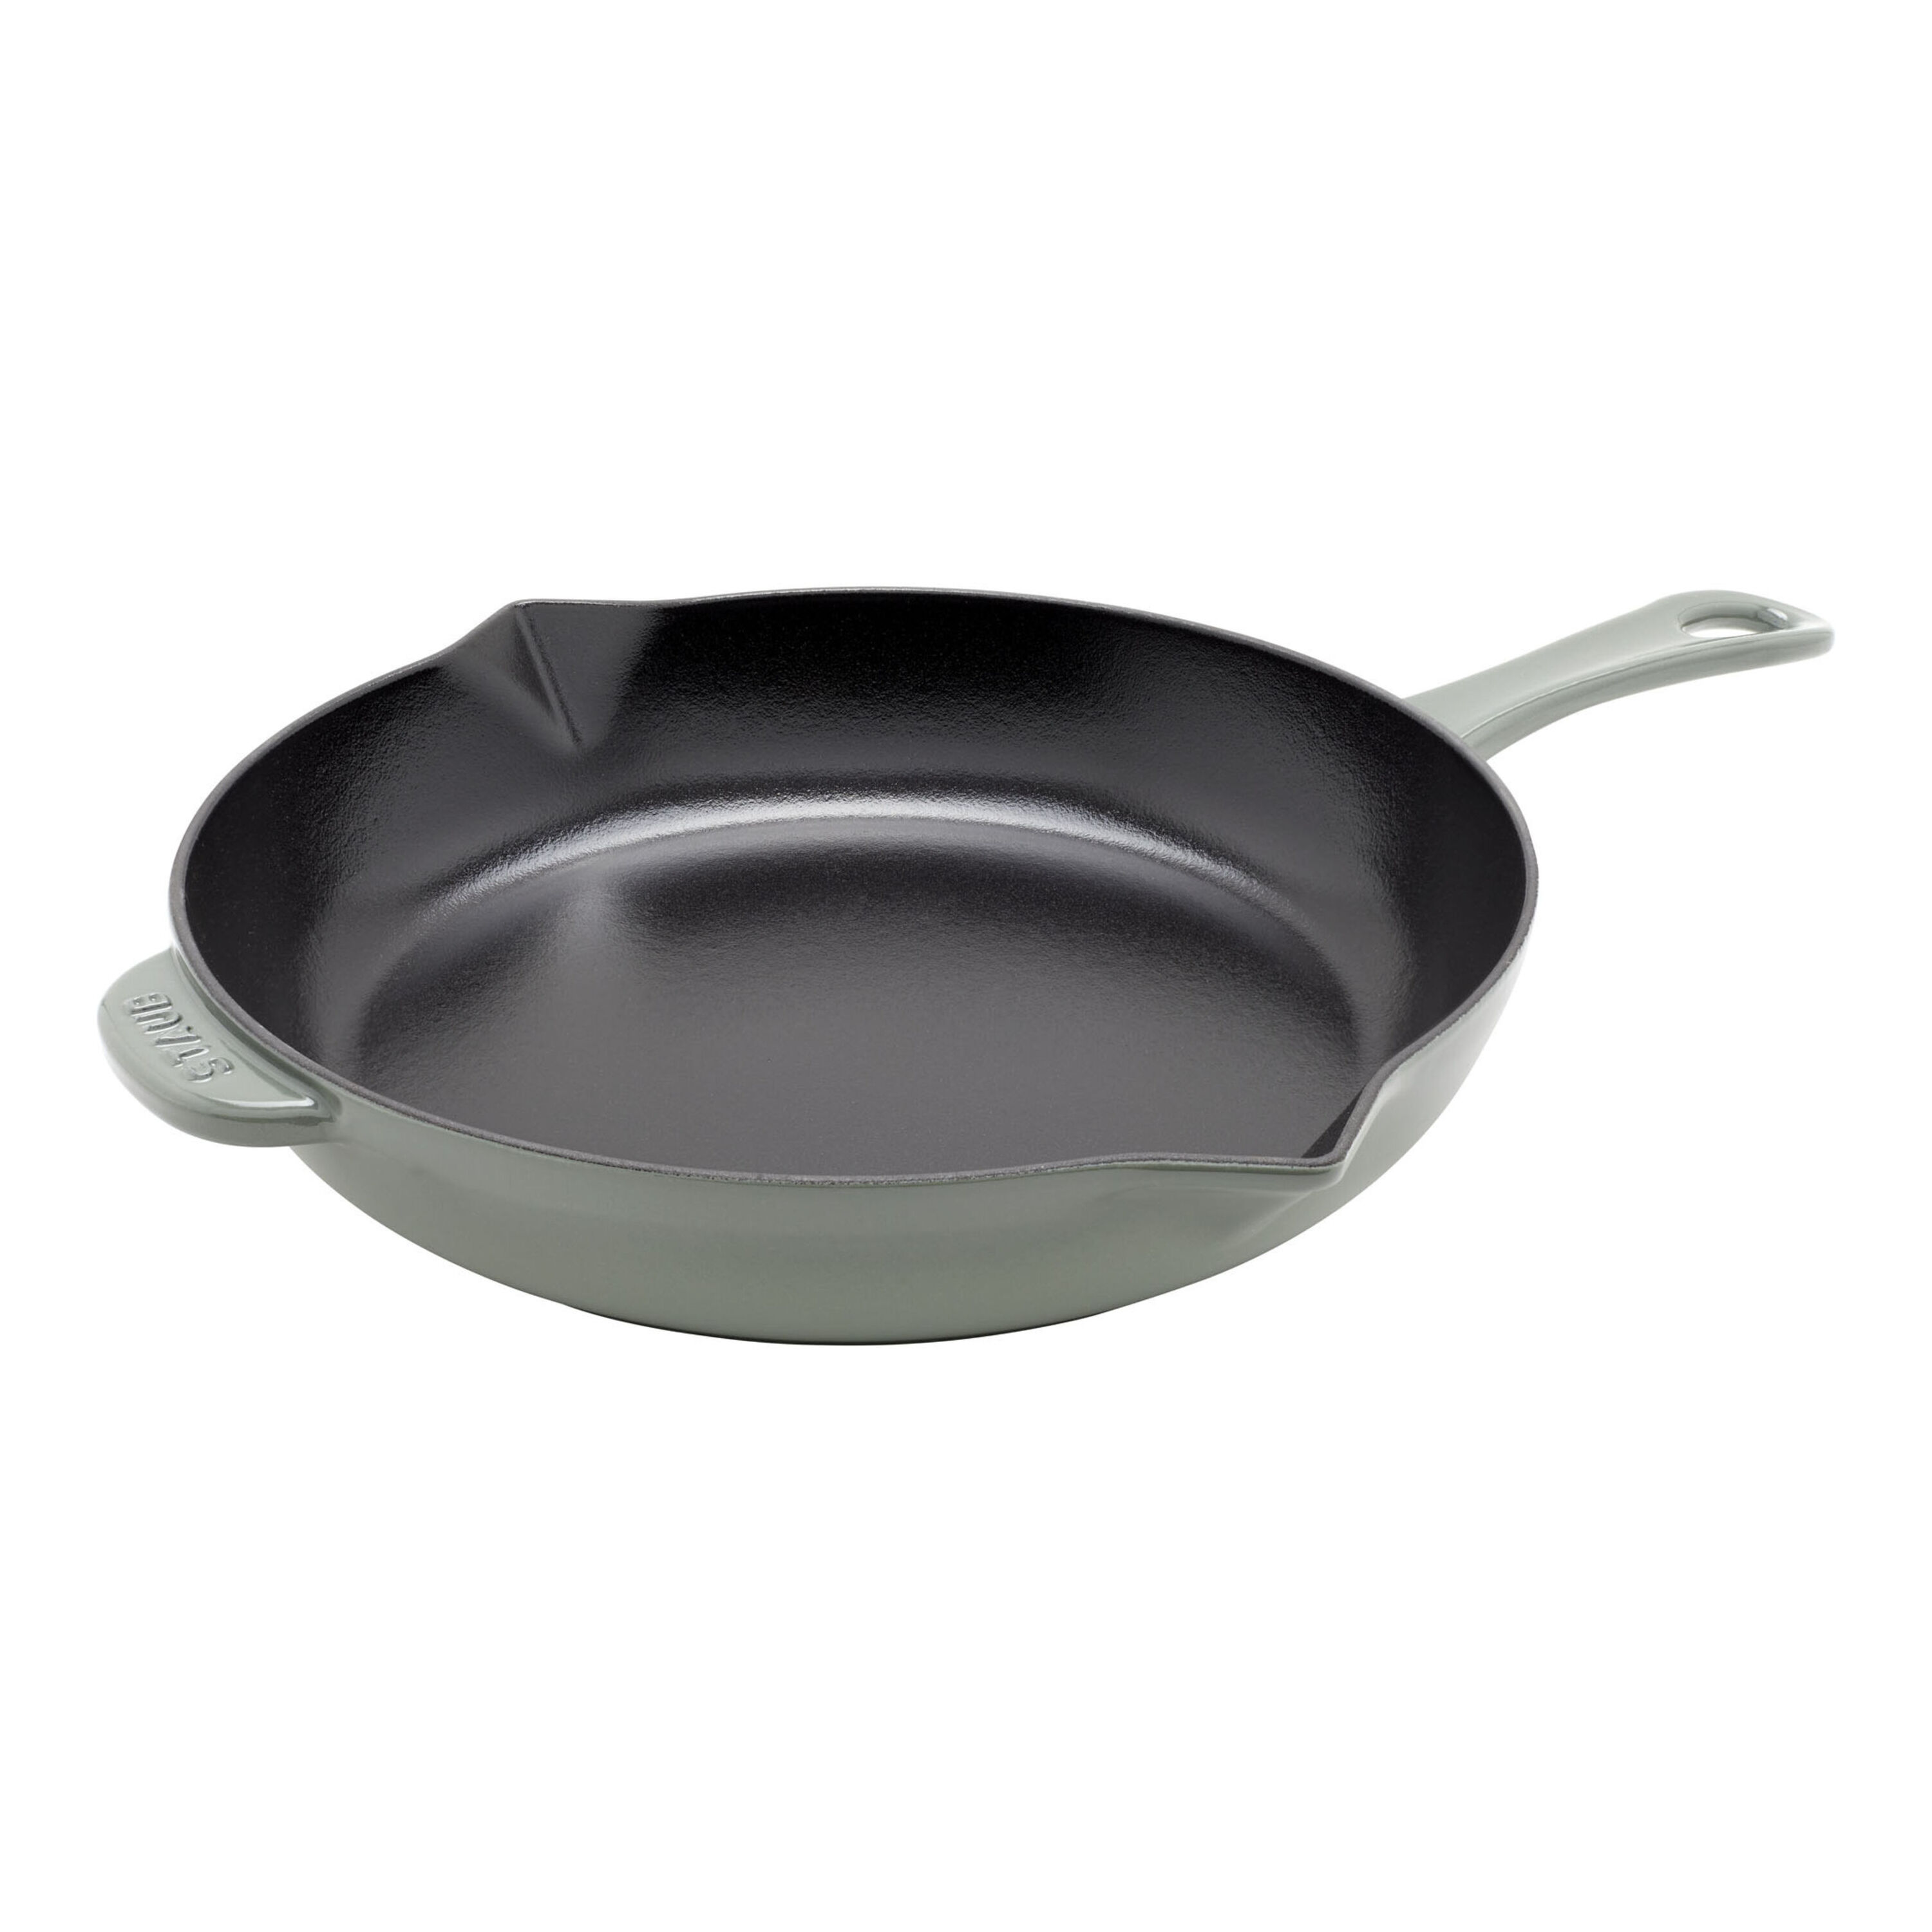 How often do you find yourself scrubbing at a pan that has been used for  cooking? If it's anything more than once in a…